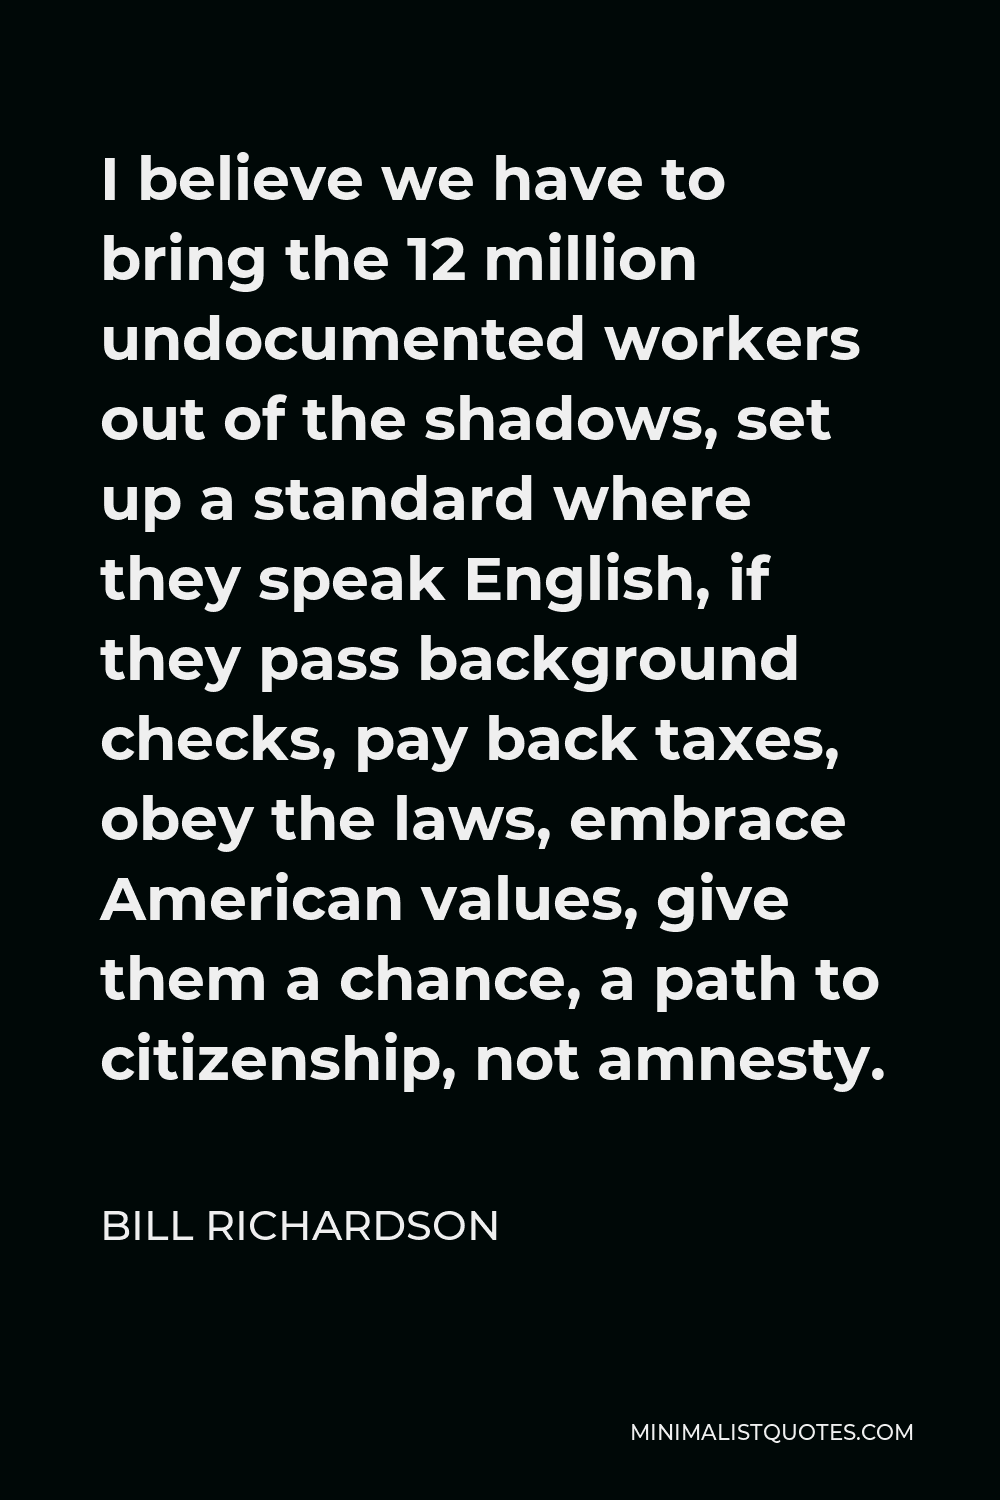 Bill Richardson Quote - I believe we have to bring the 12 million undocumented workers out of the shadows, set up a standard where they speak English, if they pass background checks, pay back taxes, obey the laws, embrace American values, give them a chance, a path to citizenship, not amnesty.